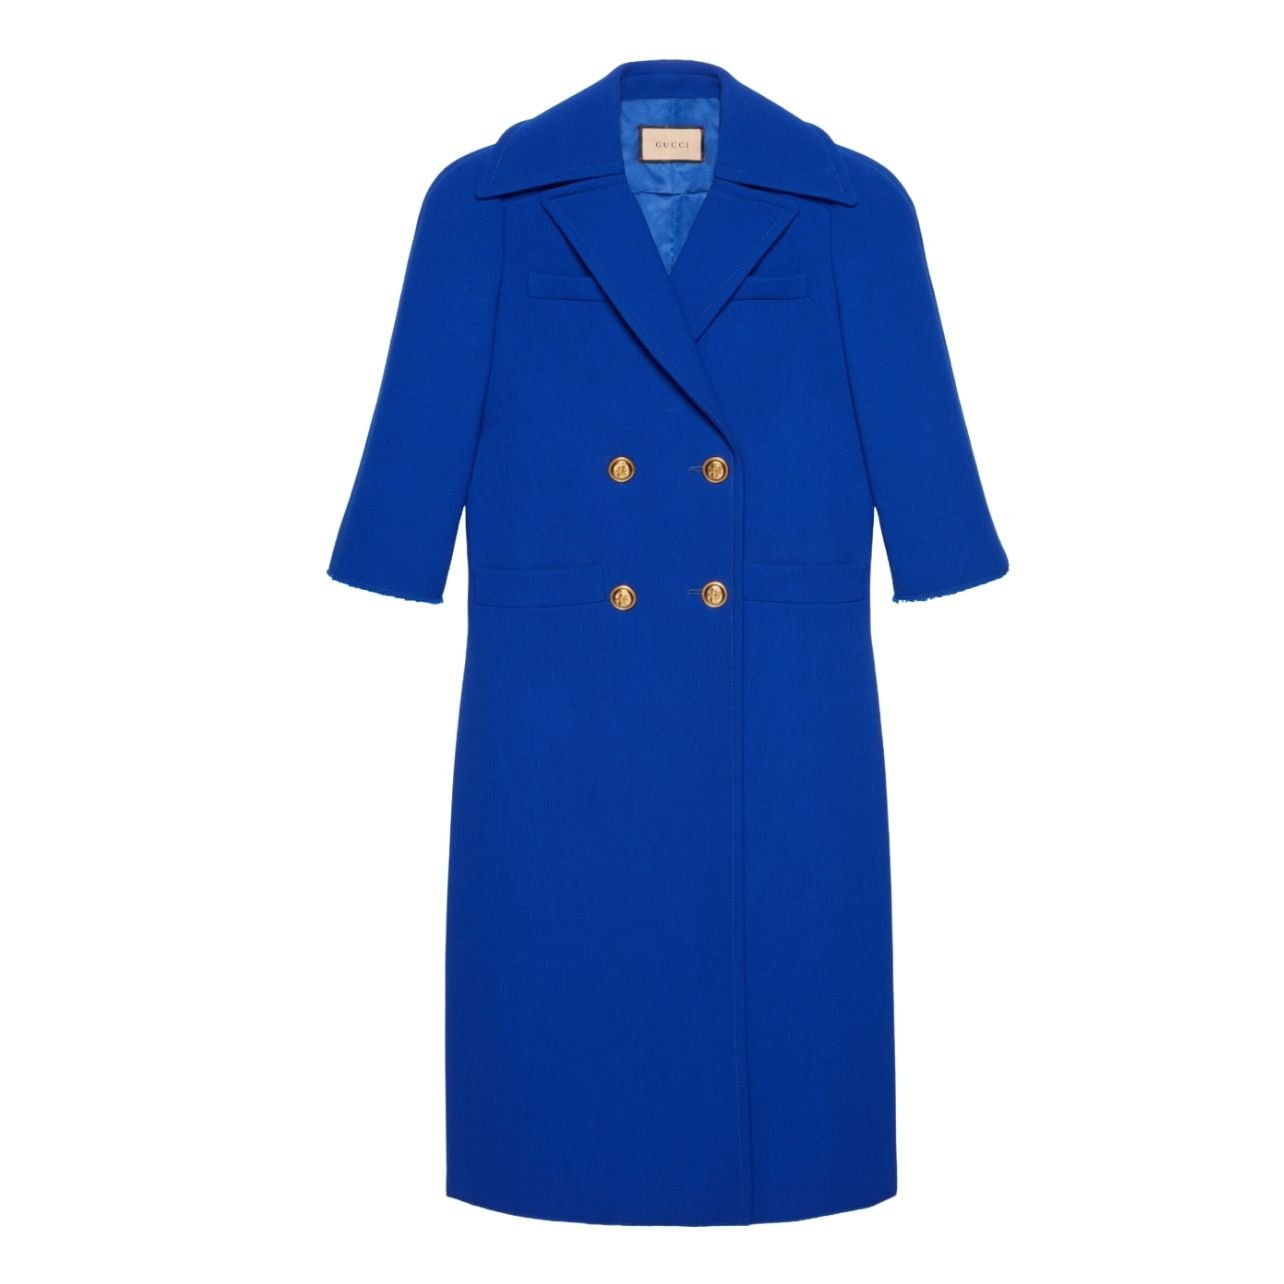 Blue Gucci Coat with gold buttons